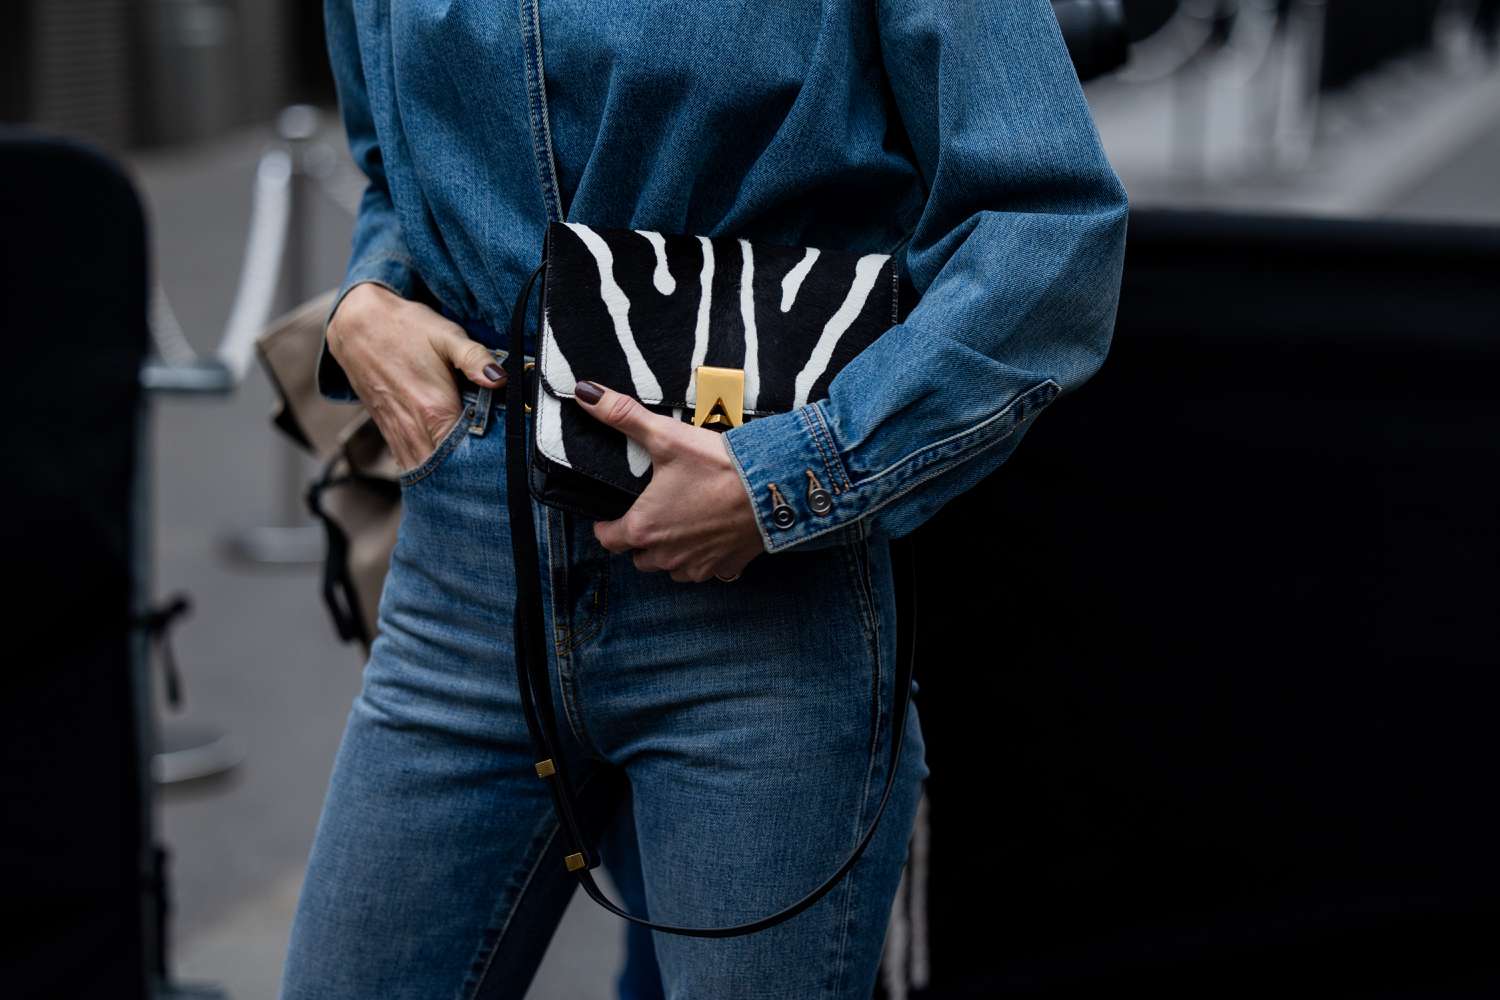 “Jeans for Every Occasion: Styling Tips for Casual to Dressy Looks”